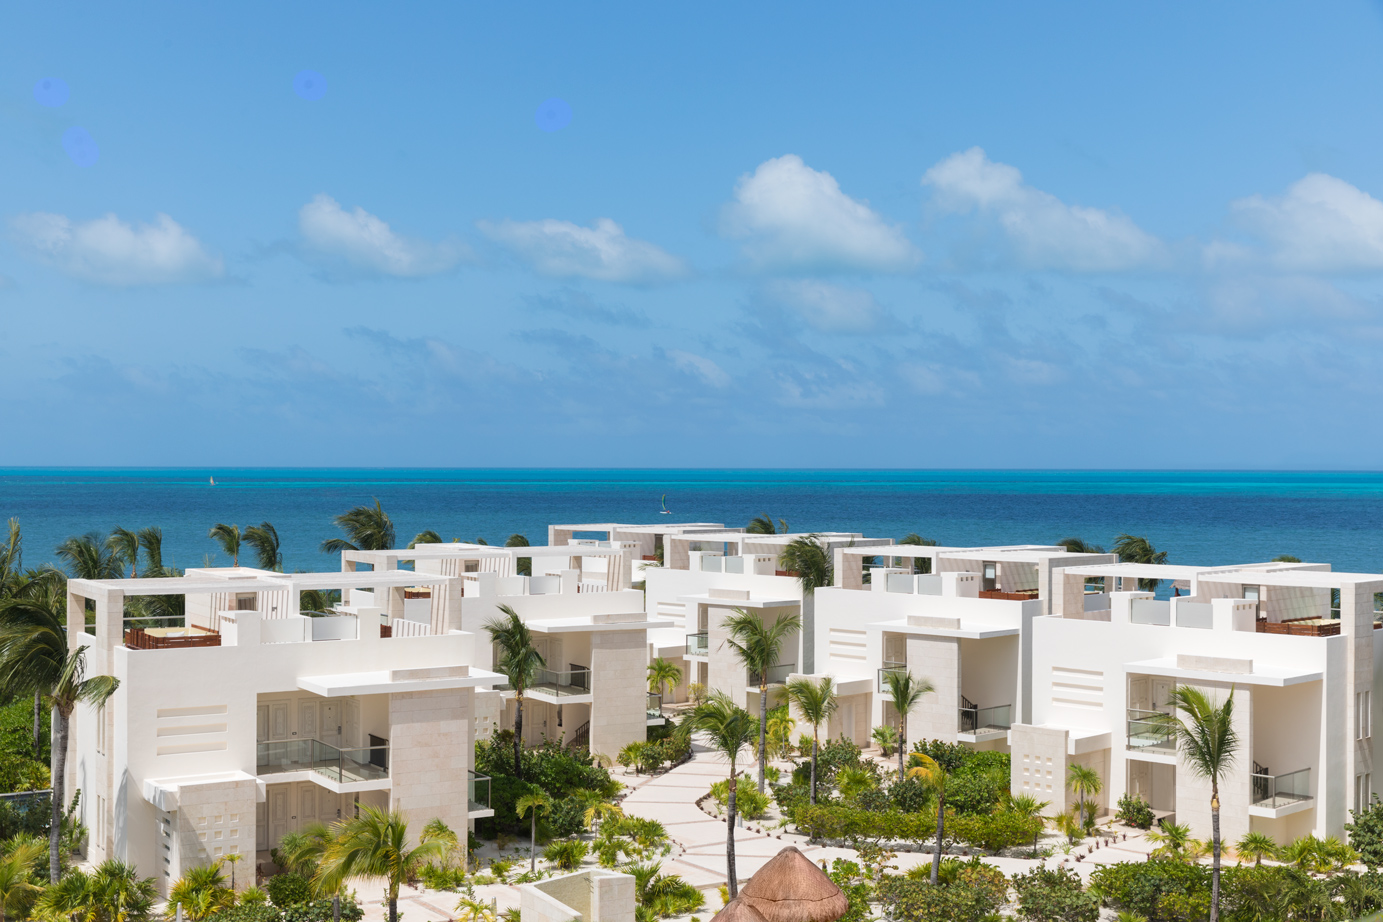 Beloved Playa Mujeres hotel for couples in Cancun